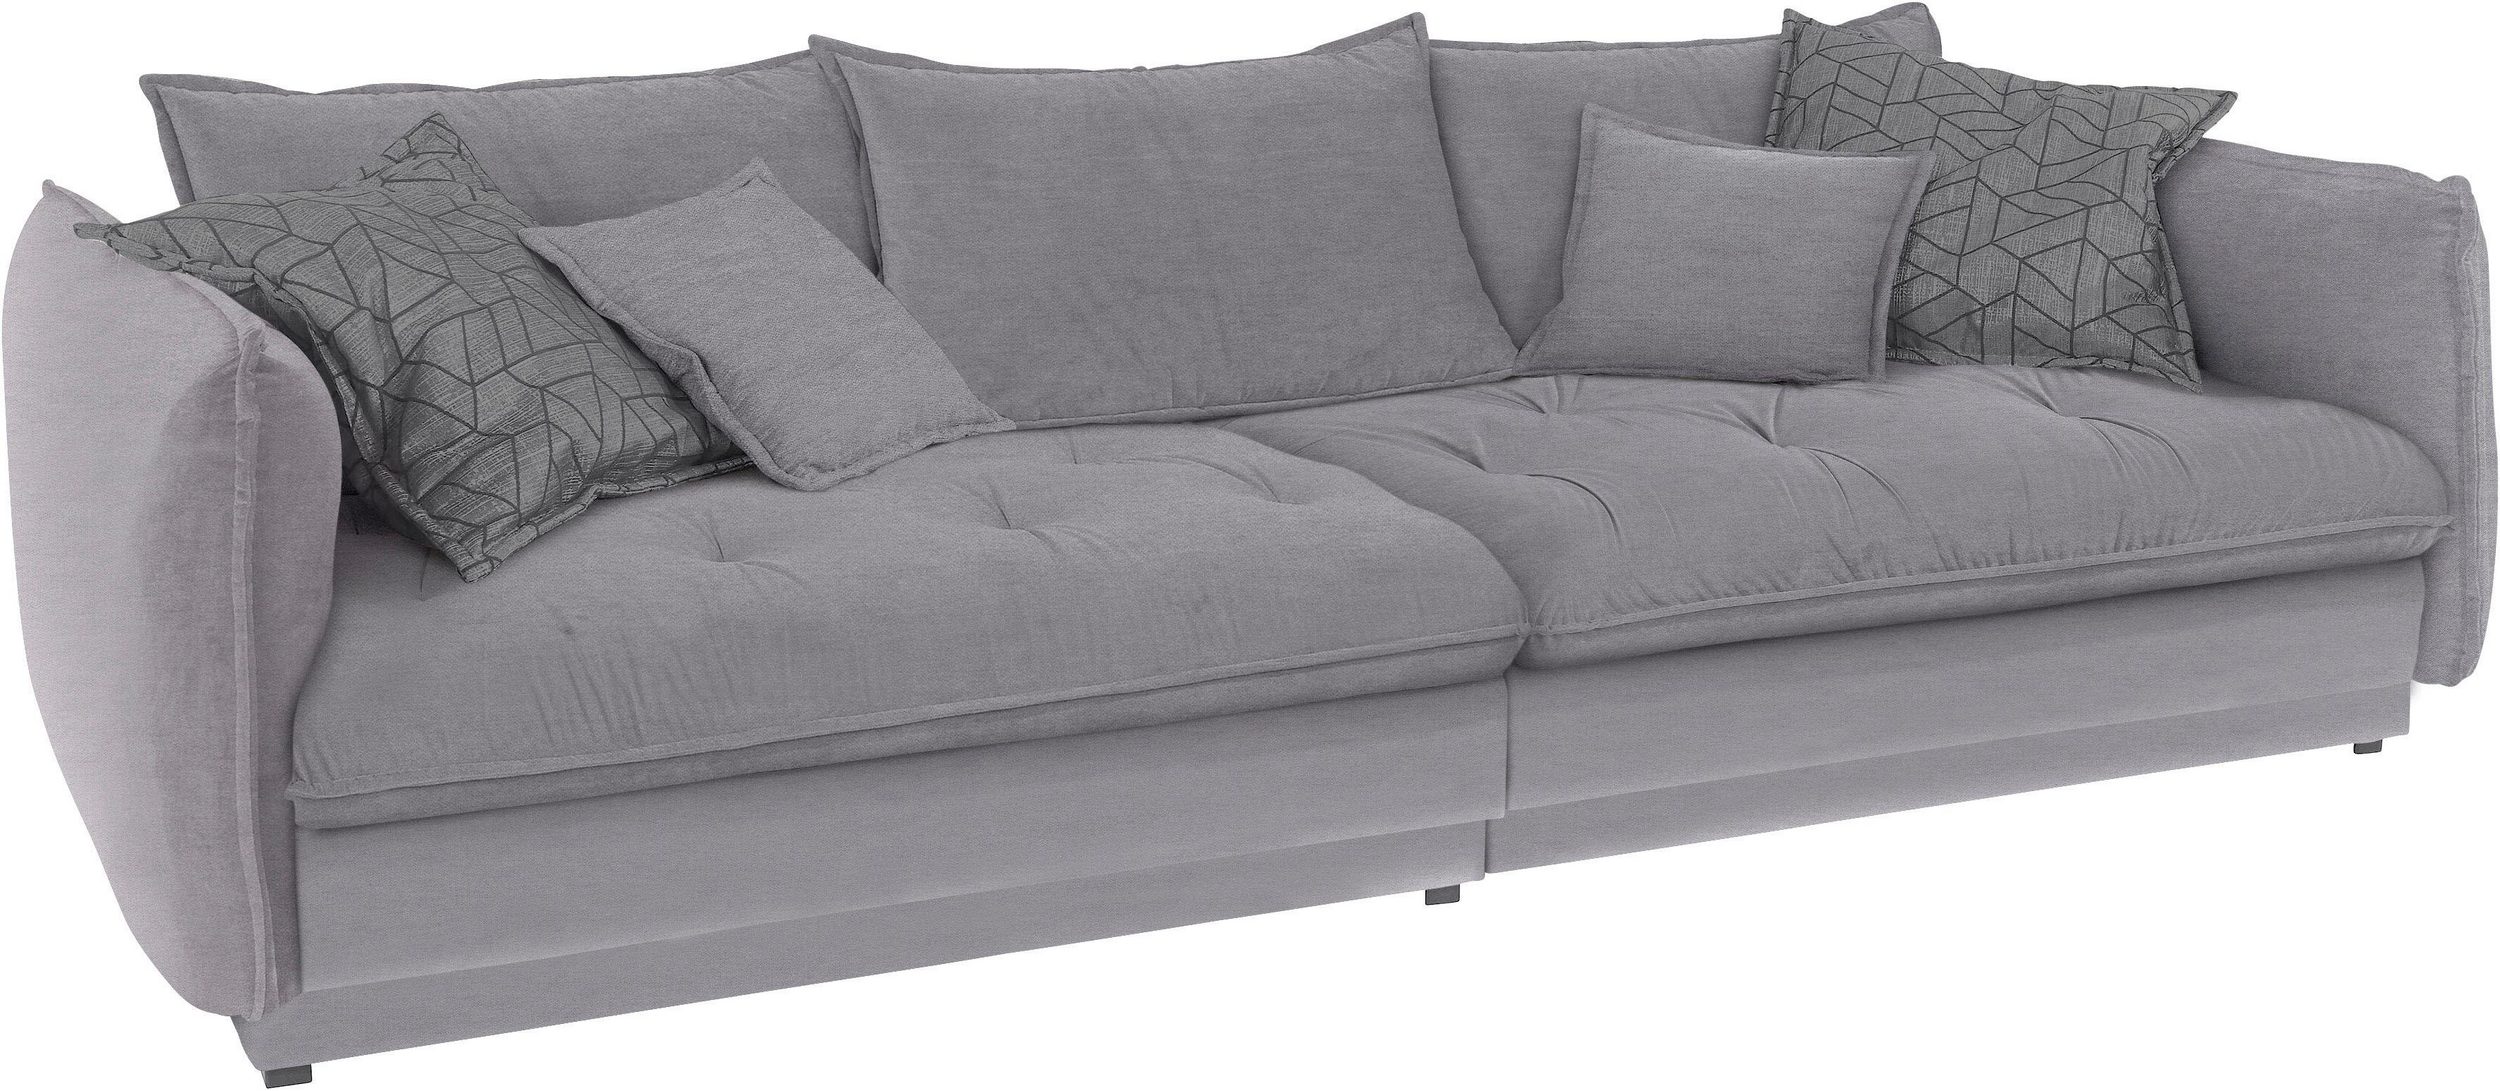 INOSIGN Big-Sofa PALLADIO - wahlweise mit LED-Ambiente Beleuchtung